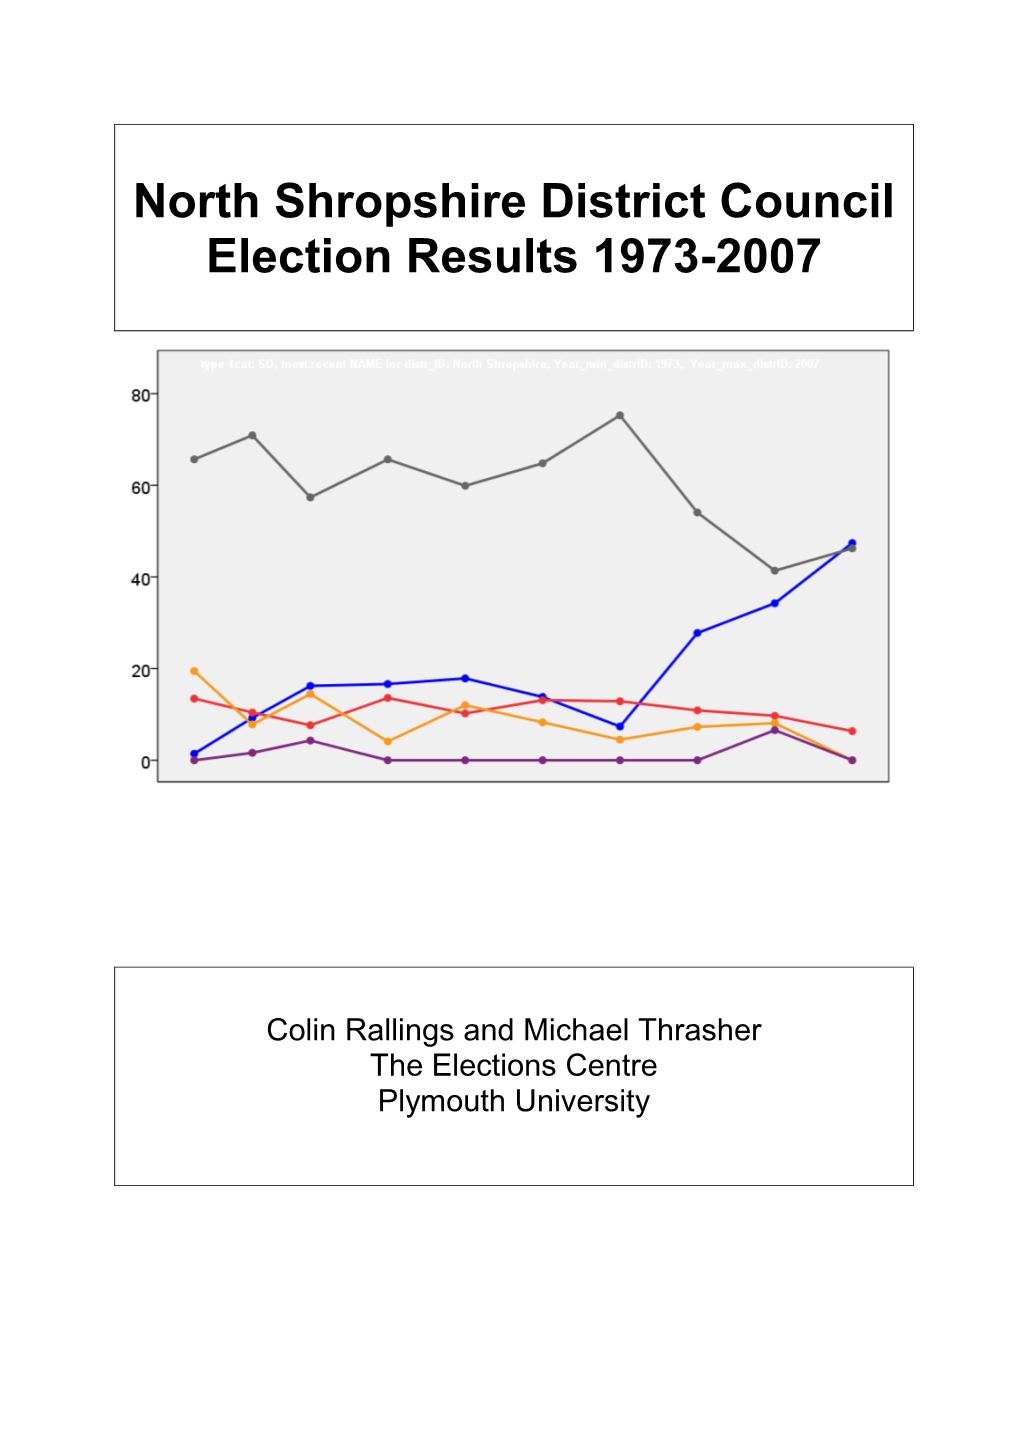 North Shropshire District Council Election Results 1973-2007